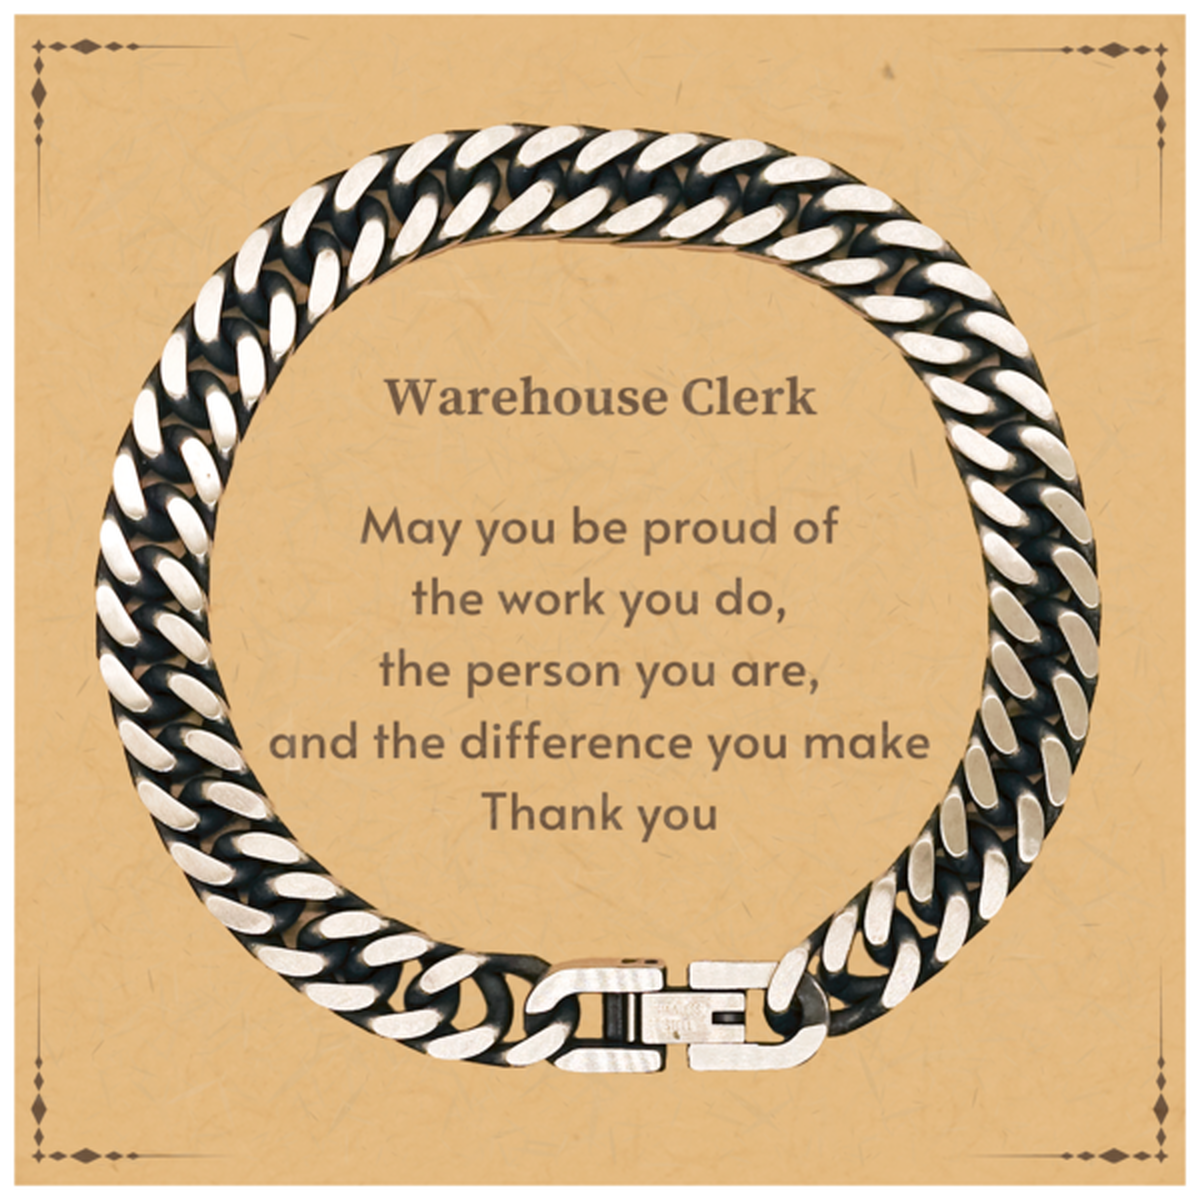 Heartwarming Cuban Link Chain Bracelet Retirement Coworkers Gifts for Warehouse Clerk, Warehouse Clerk May You be proud of the work you do, the person you are Gifts for Boss Men Women Friends